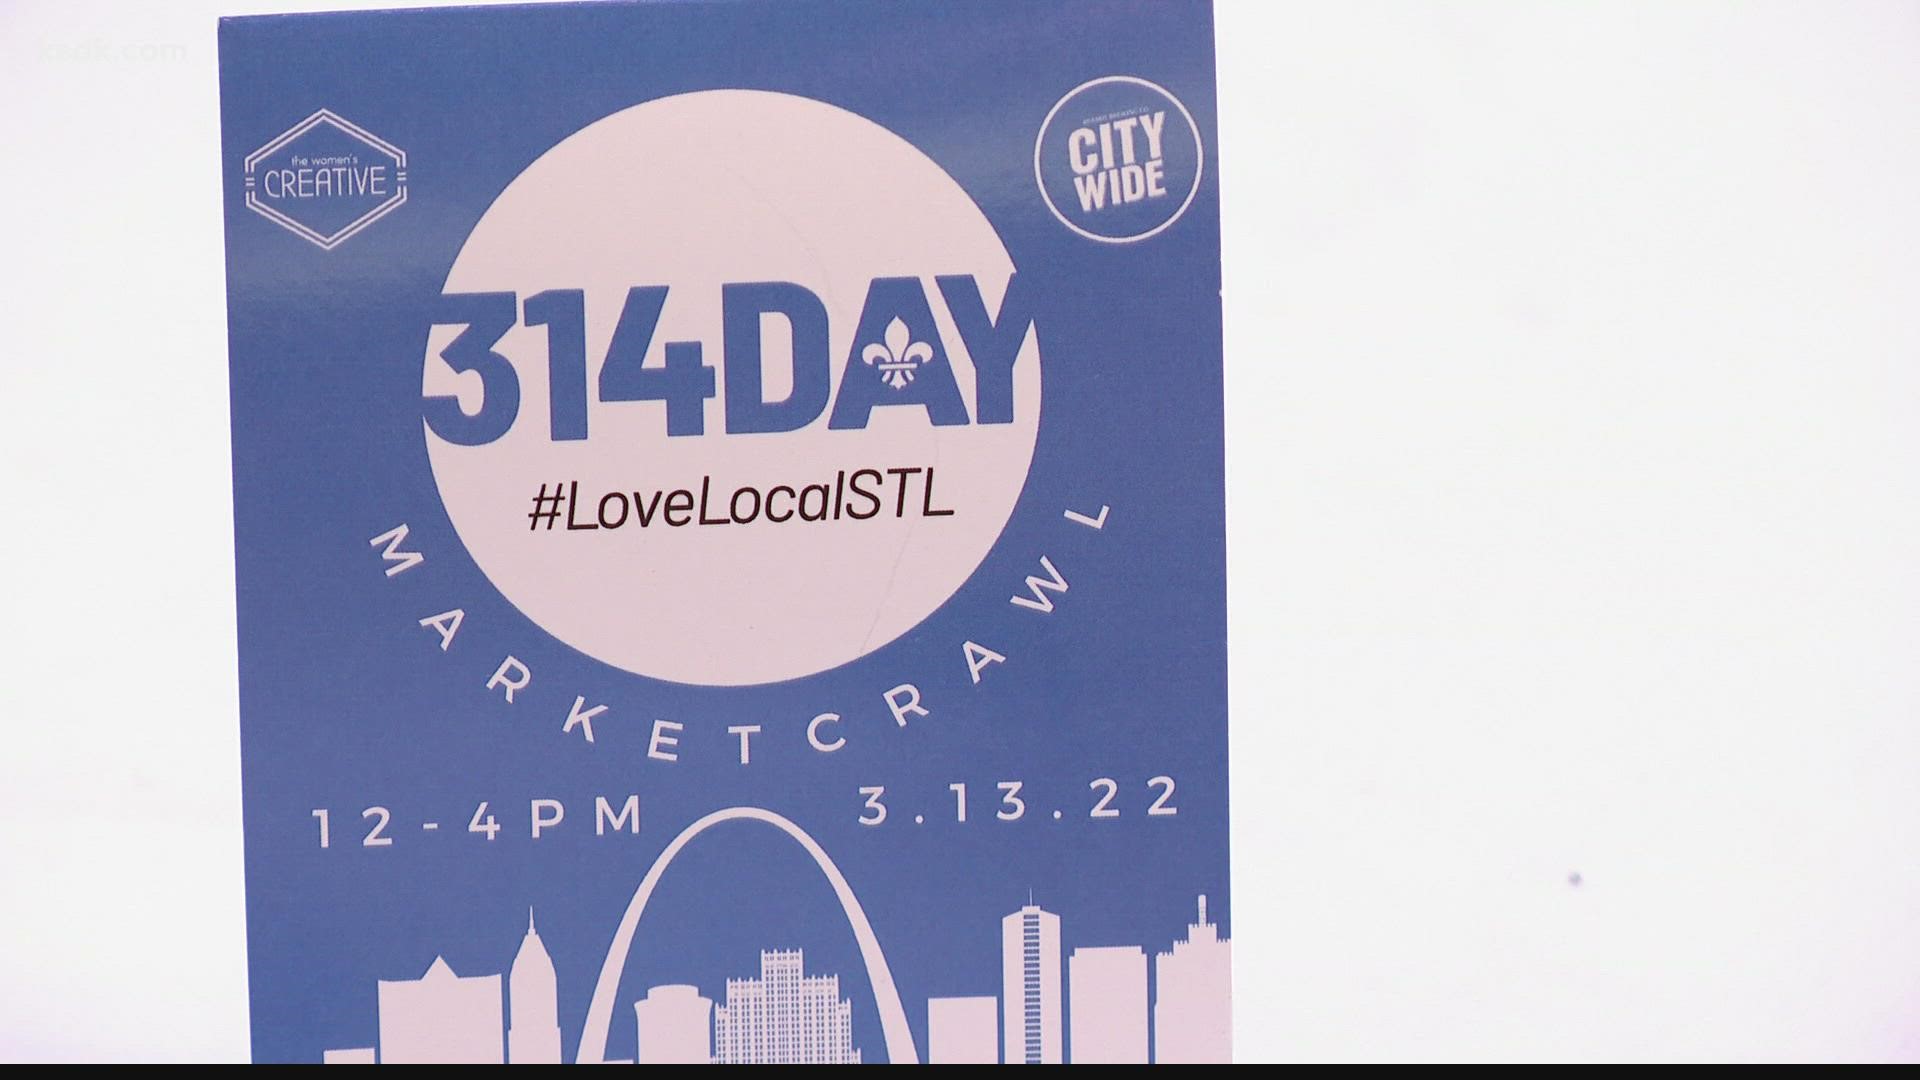 The Women's Creative, the 314 Day Foundation and STL Made hosted a Market Crawl on Sunday ahead of a full day of events on Monday.